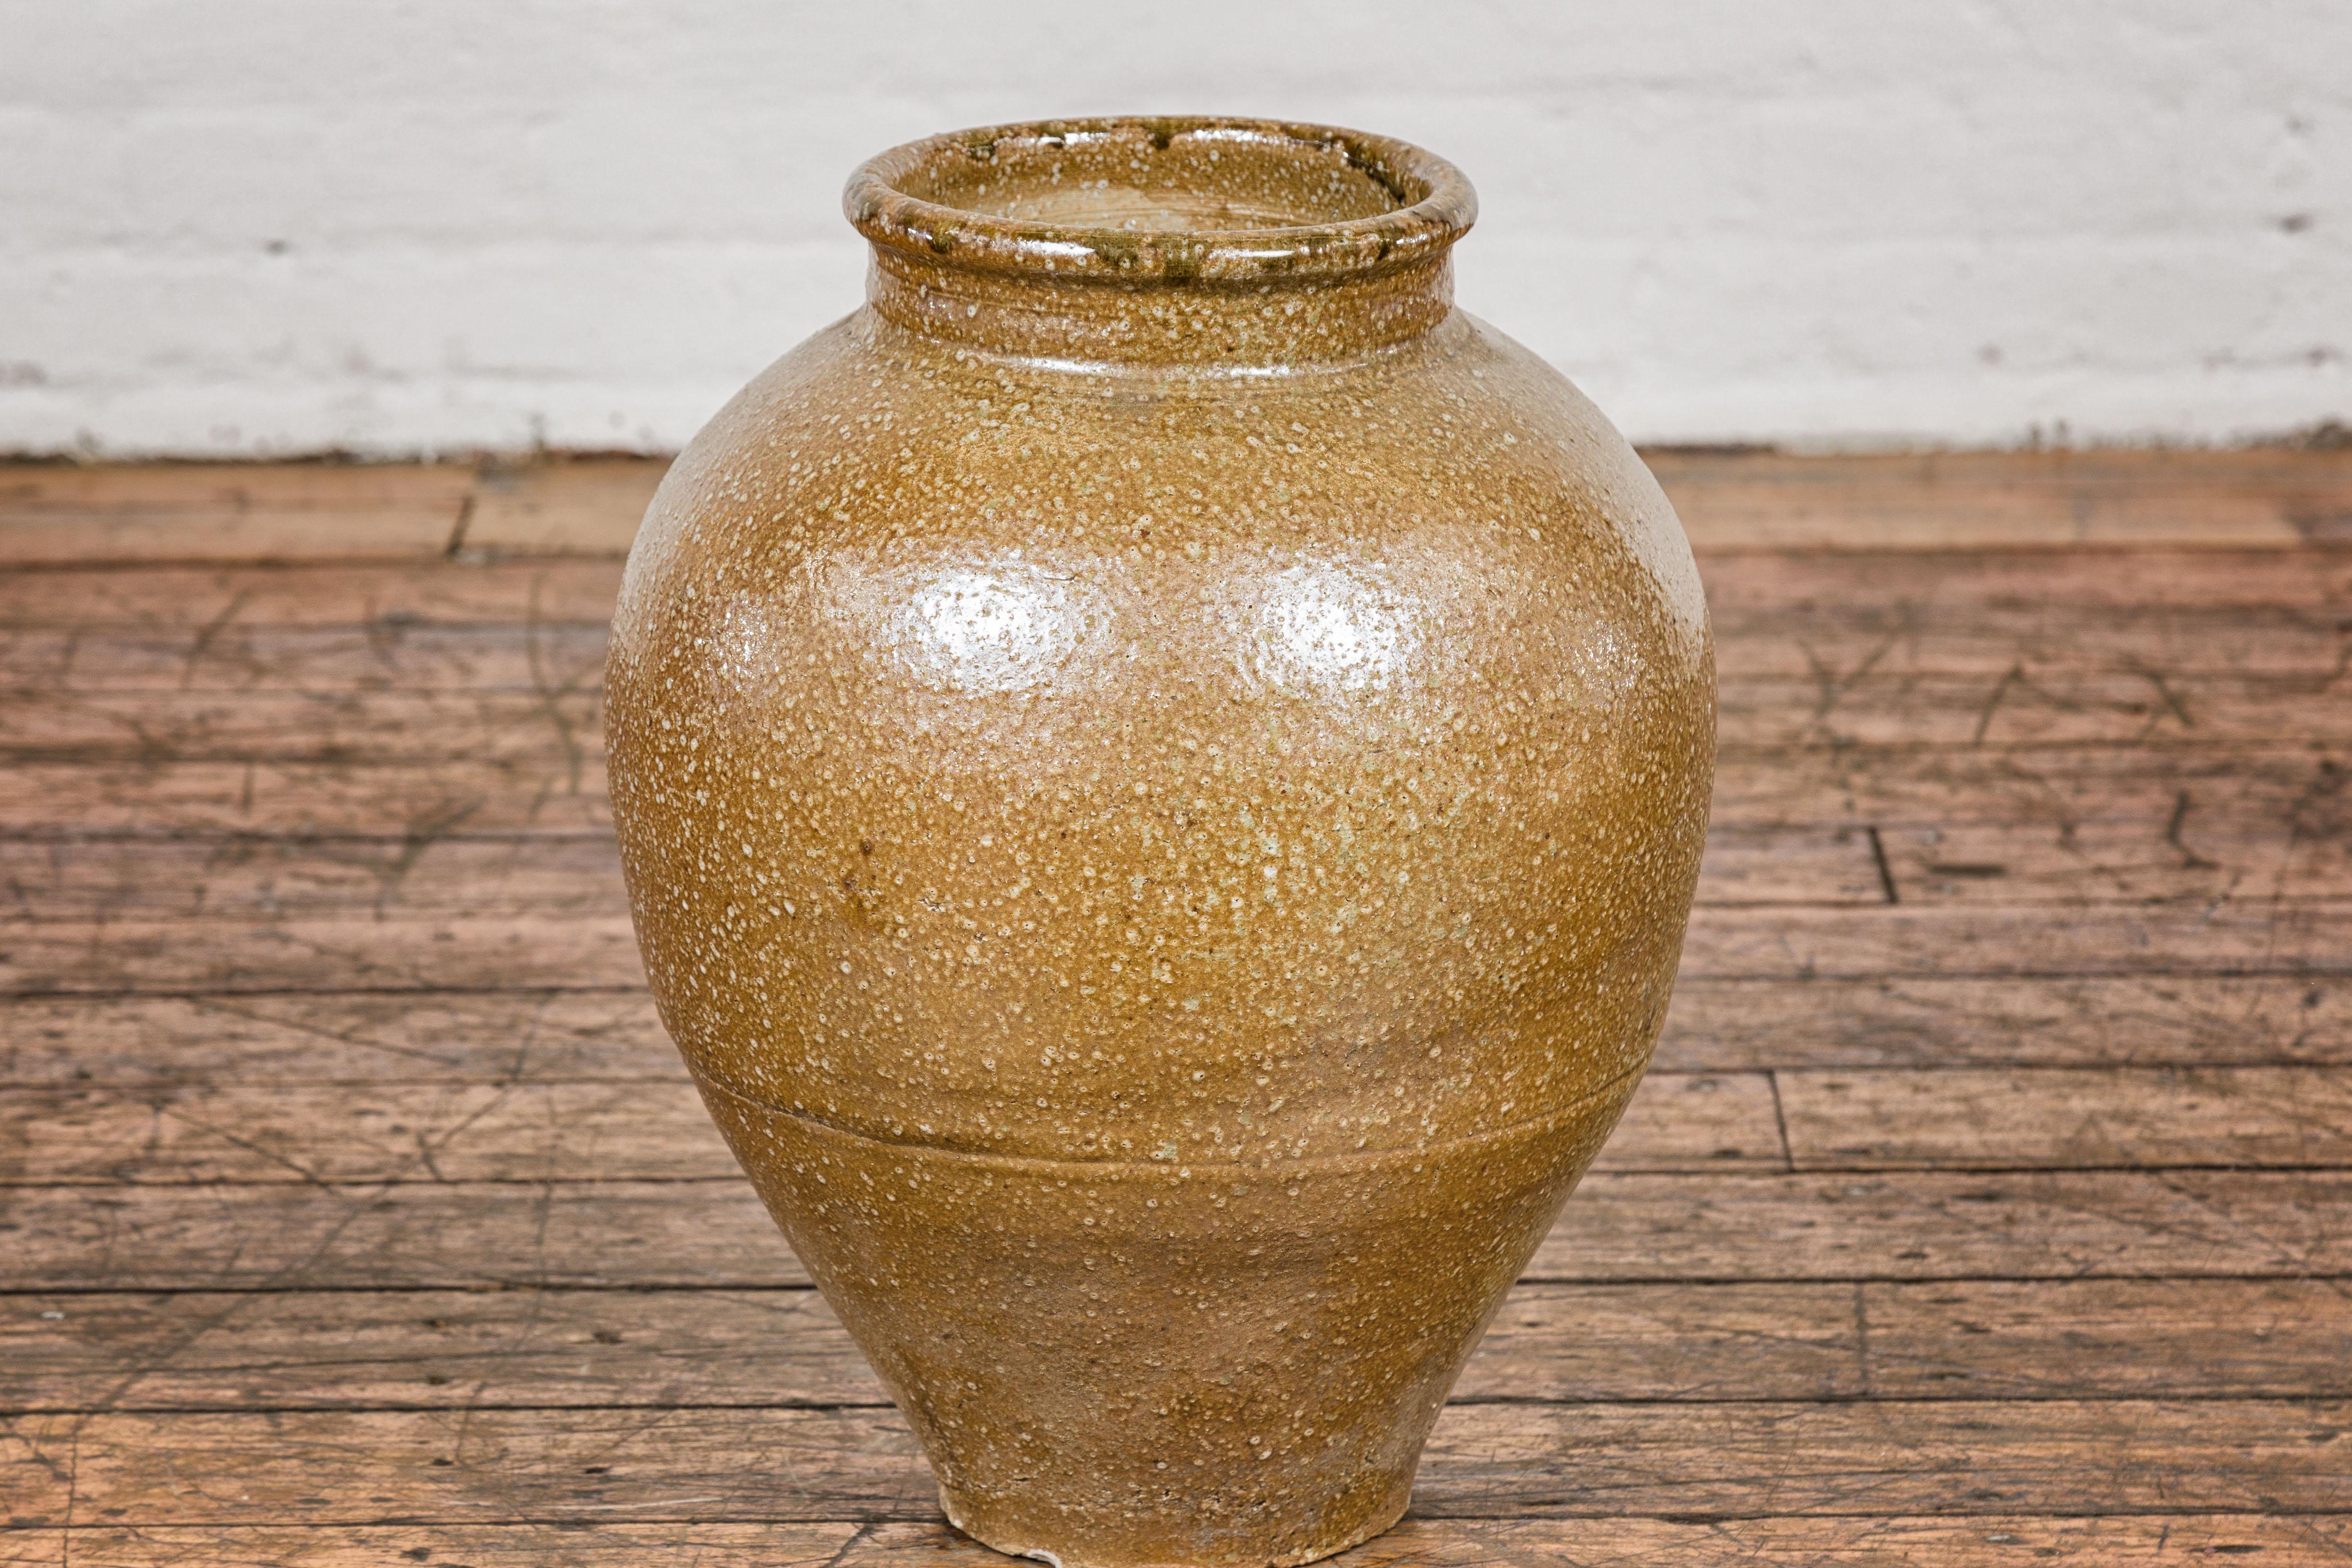 Japanese Taishō Period Two-Tone Sand Glaze Vase with Textured Finish, circa 1900 For Sale 5